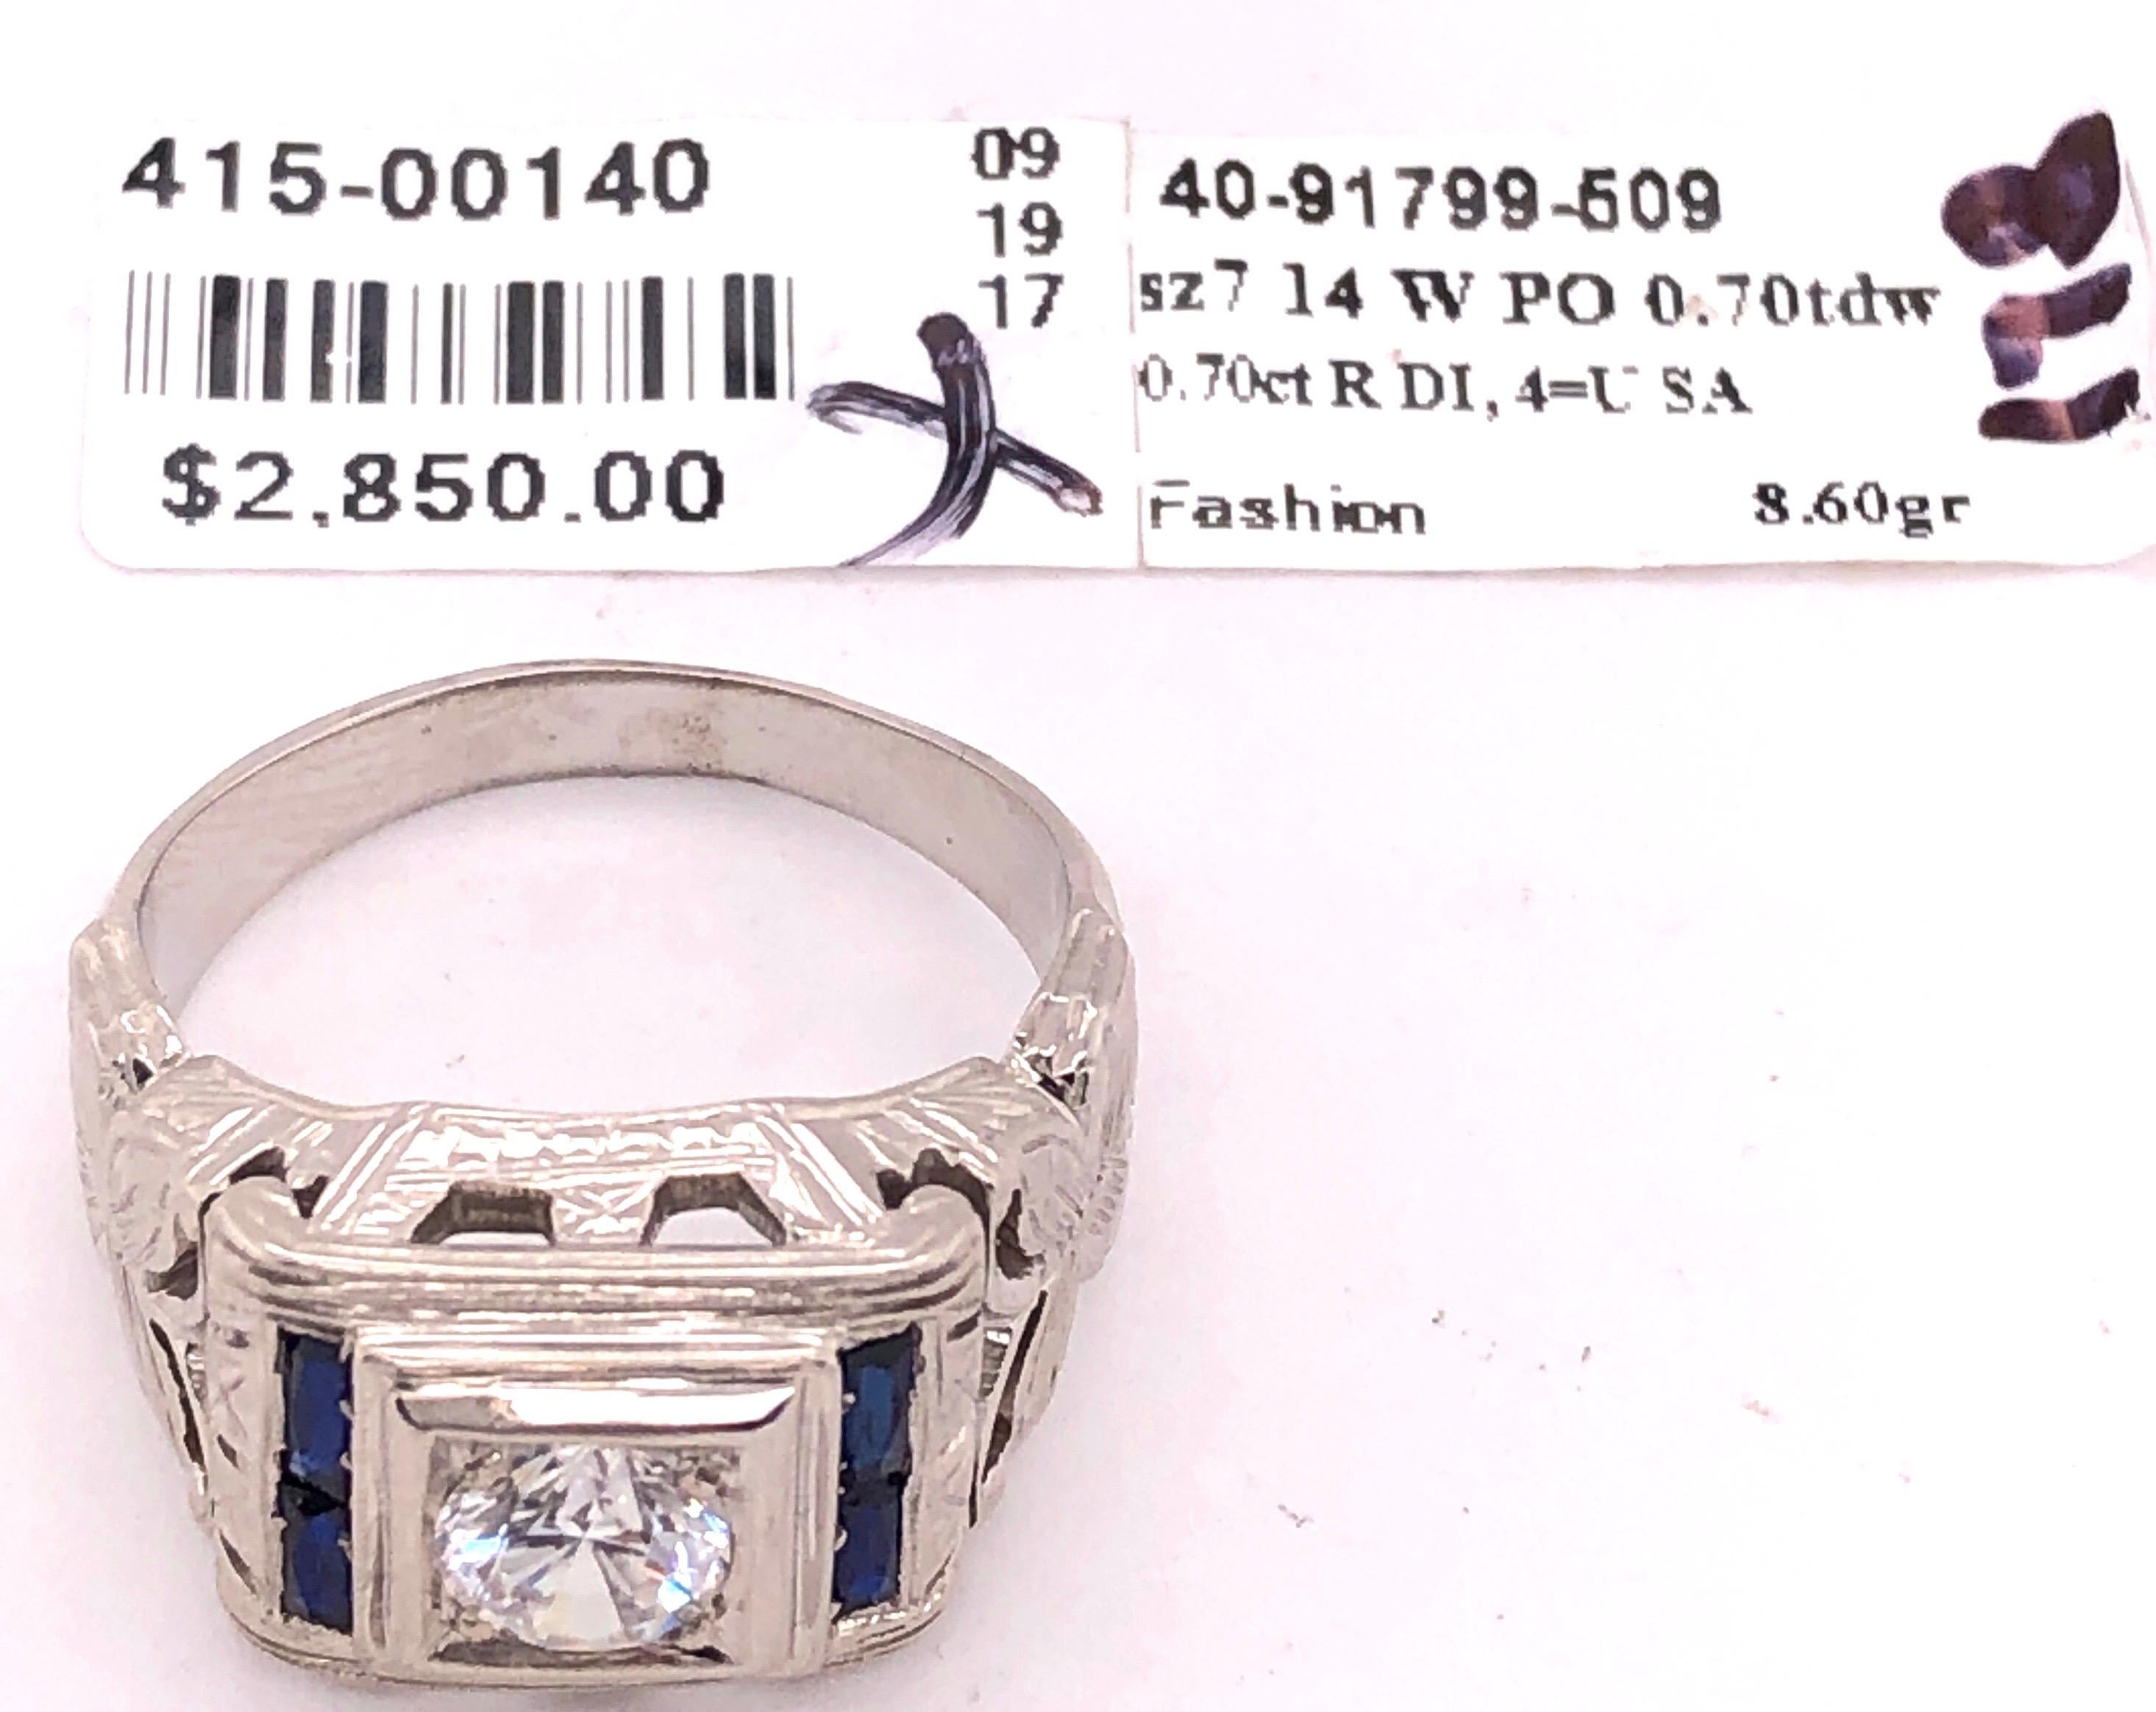 14 Karat White Gold Fashion Ring with Round Diamond and Sapphires For Sale 8